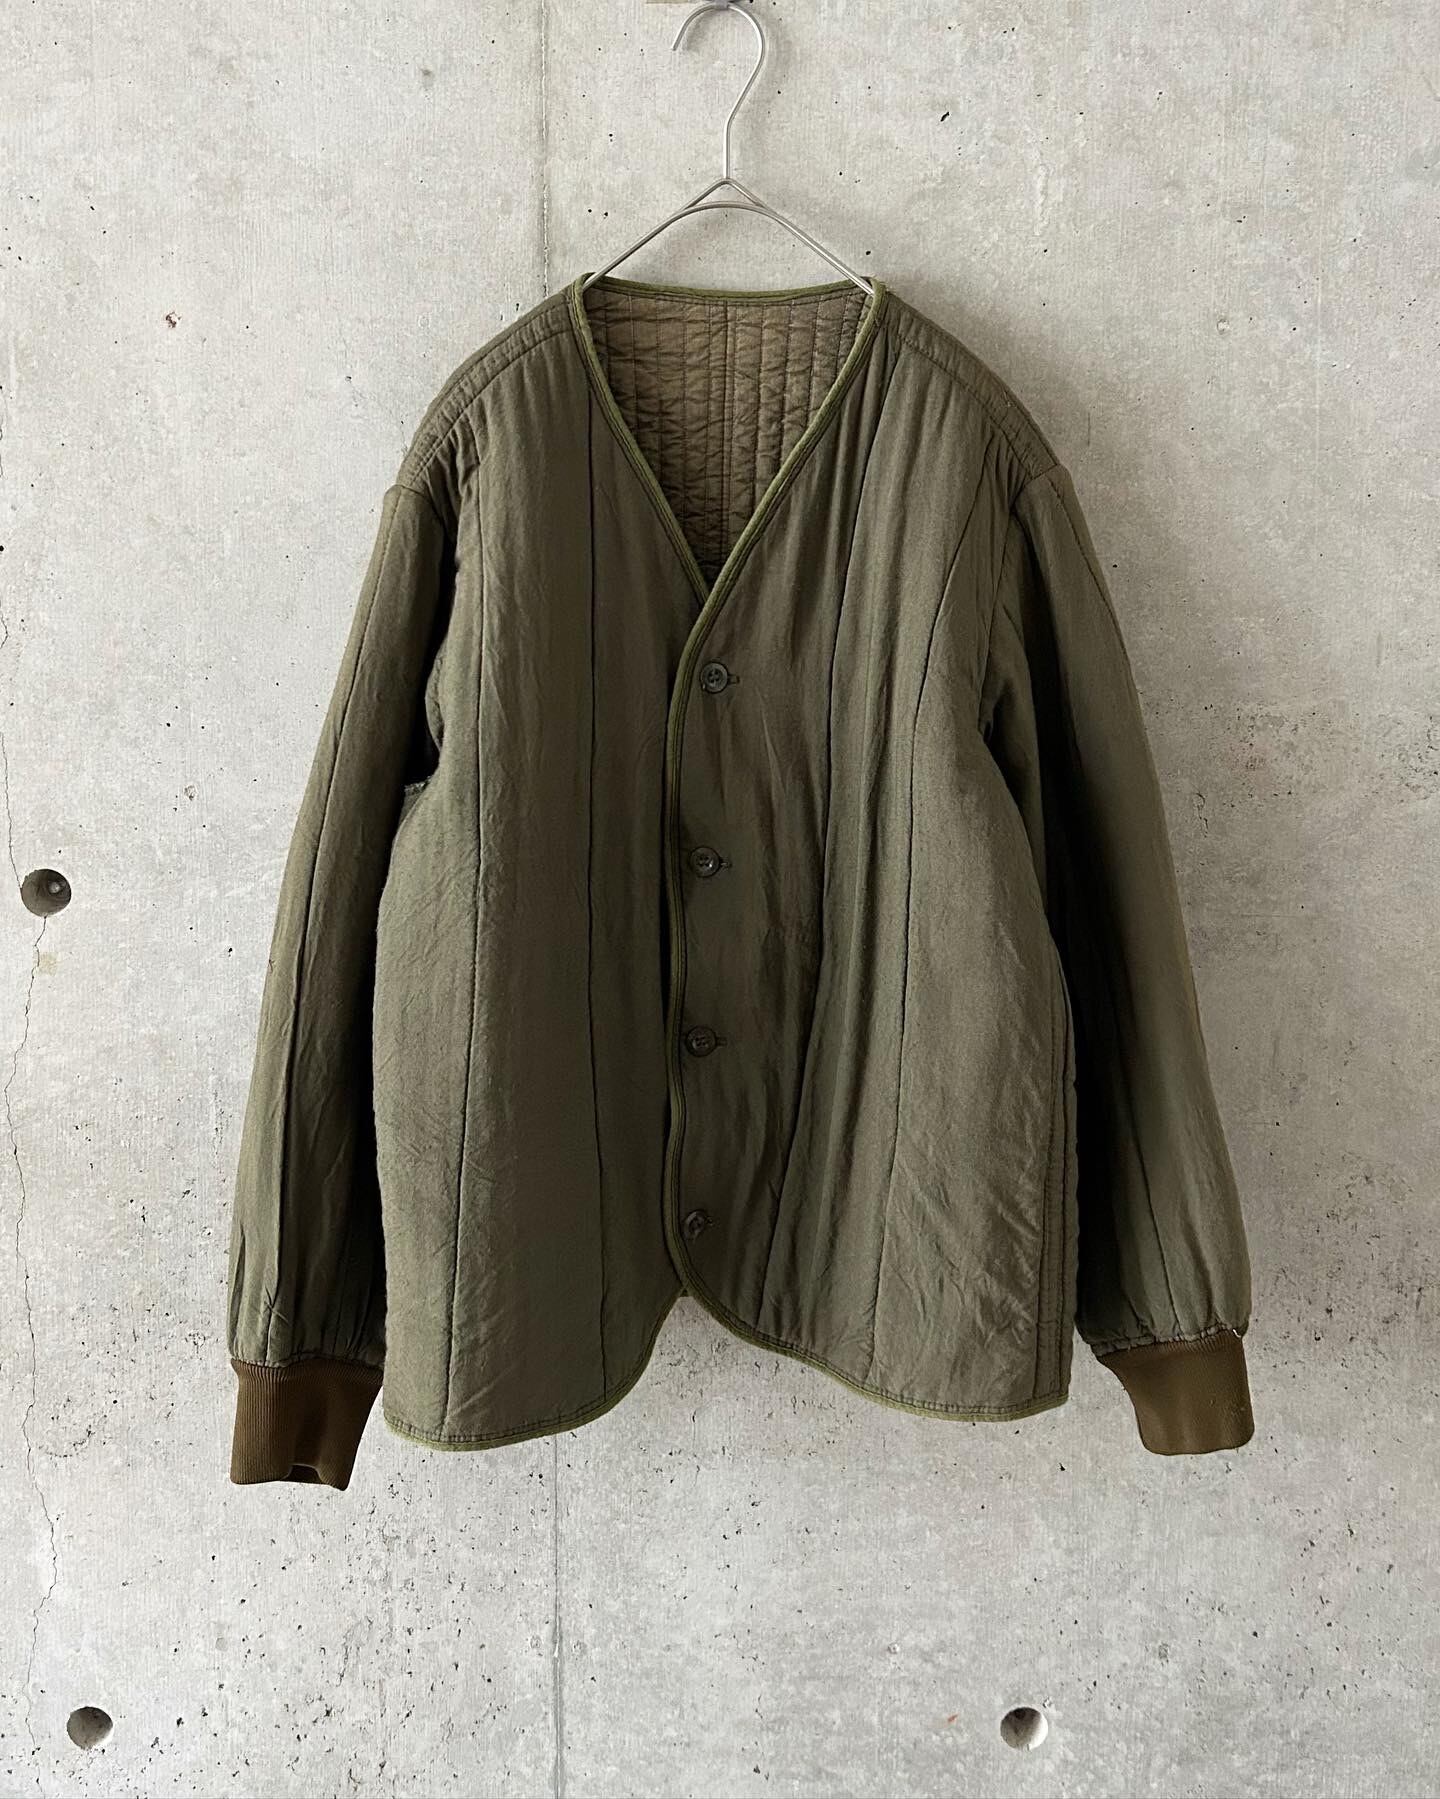 Vintage "Czech military" truck jacket - ブルゾン